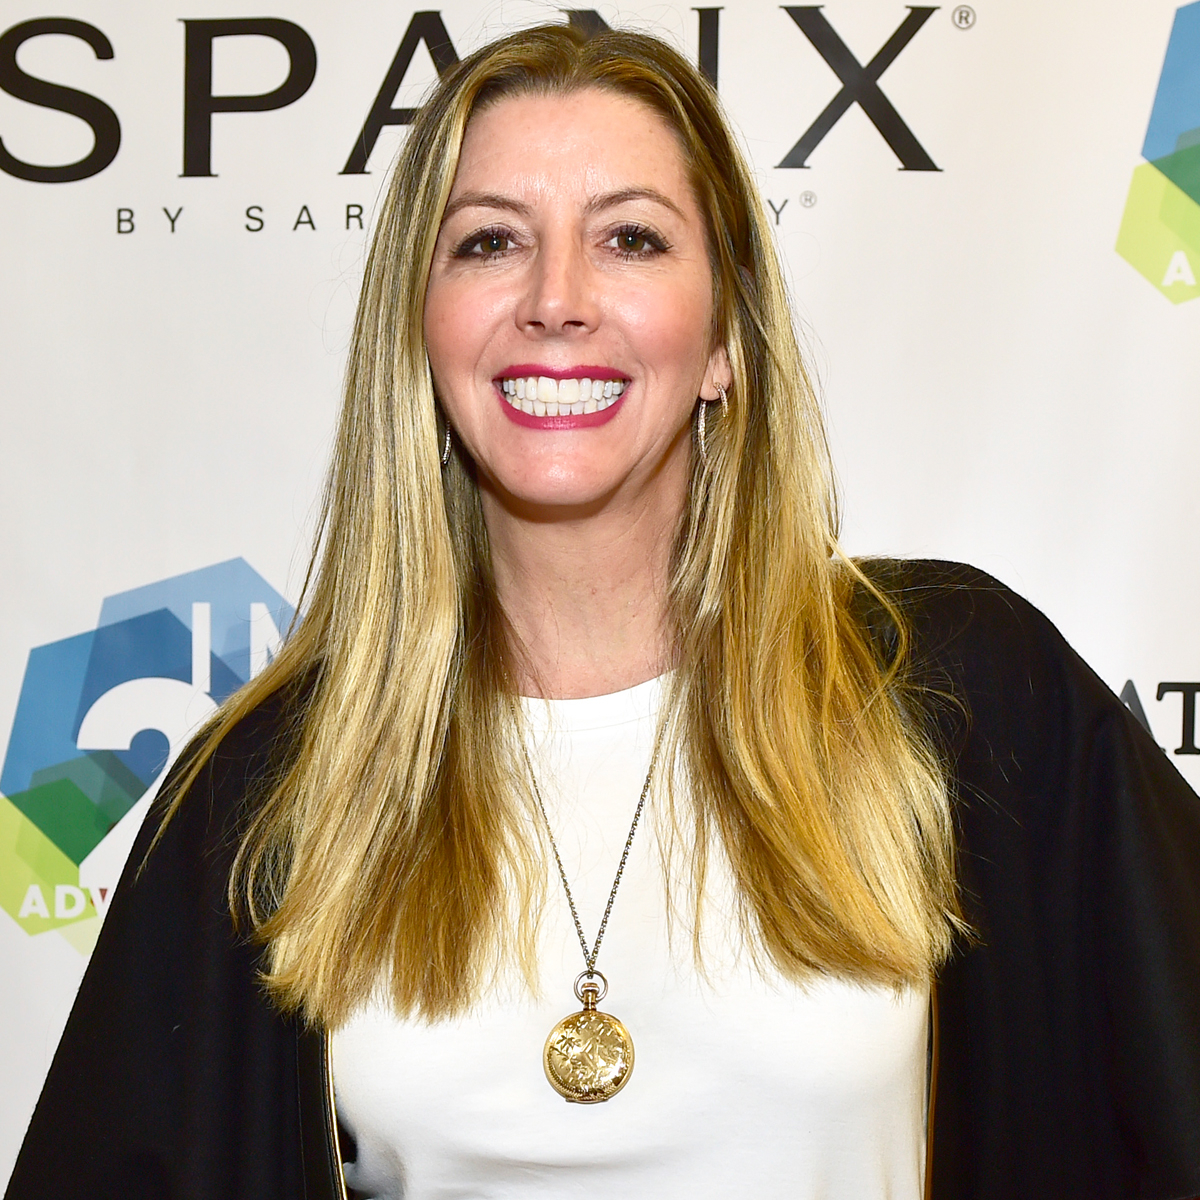 What Sara Blakely, Spanx Founder, Can't Travel Without - The New York Times